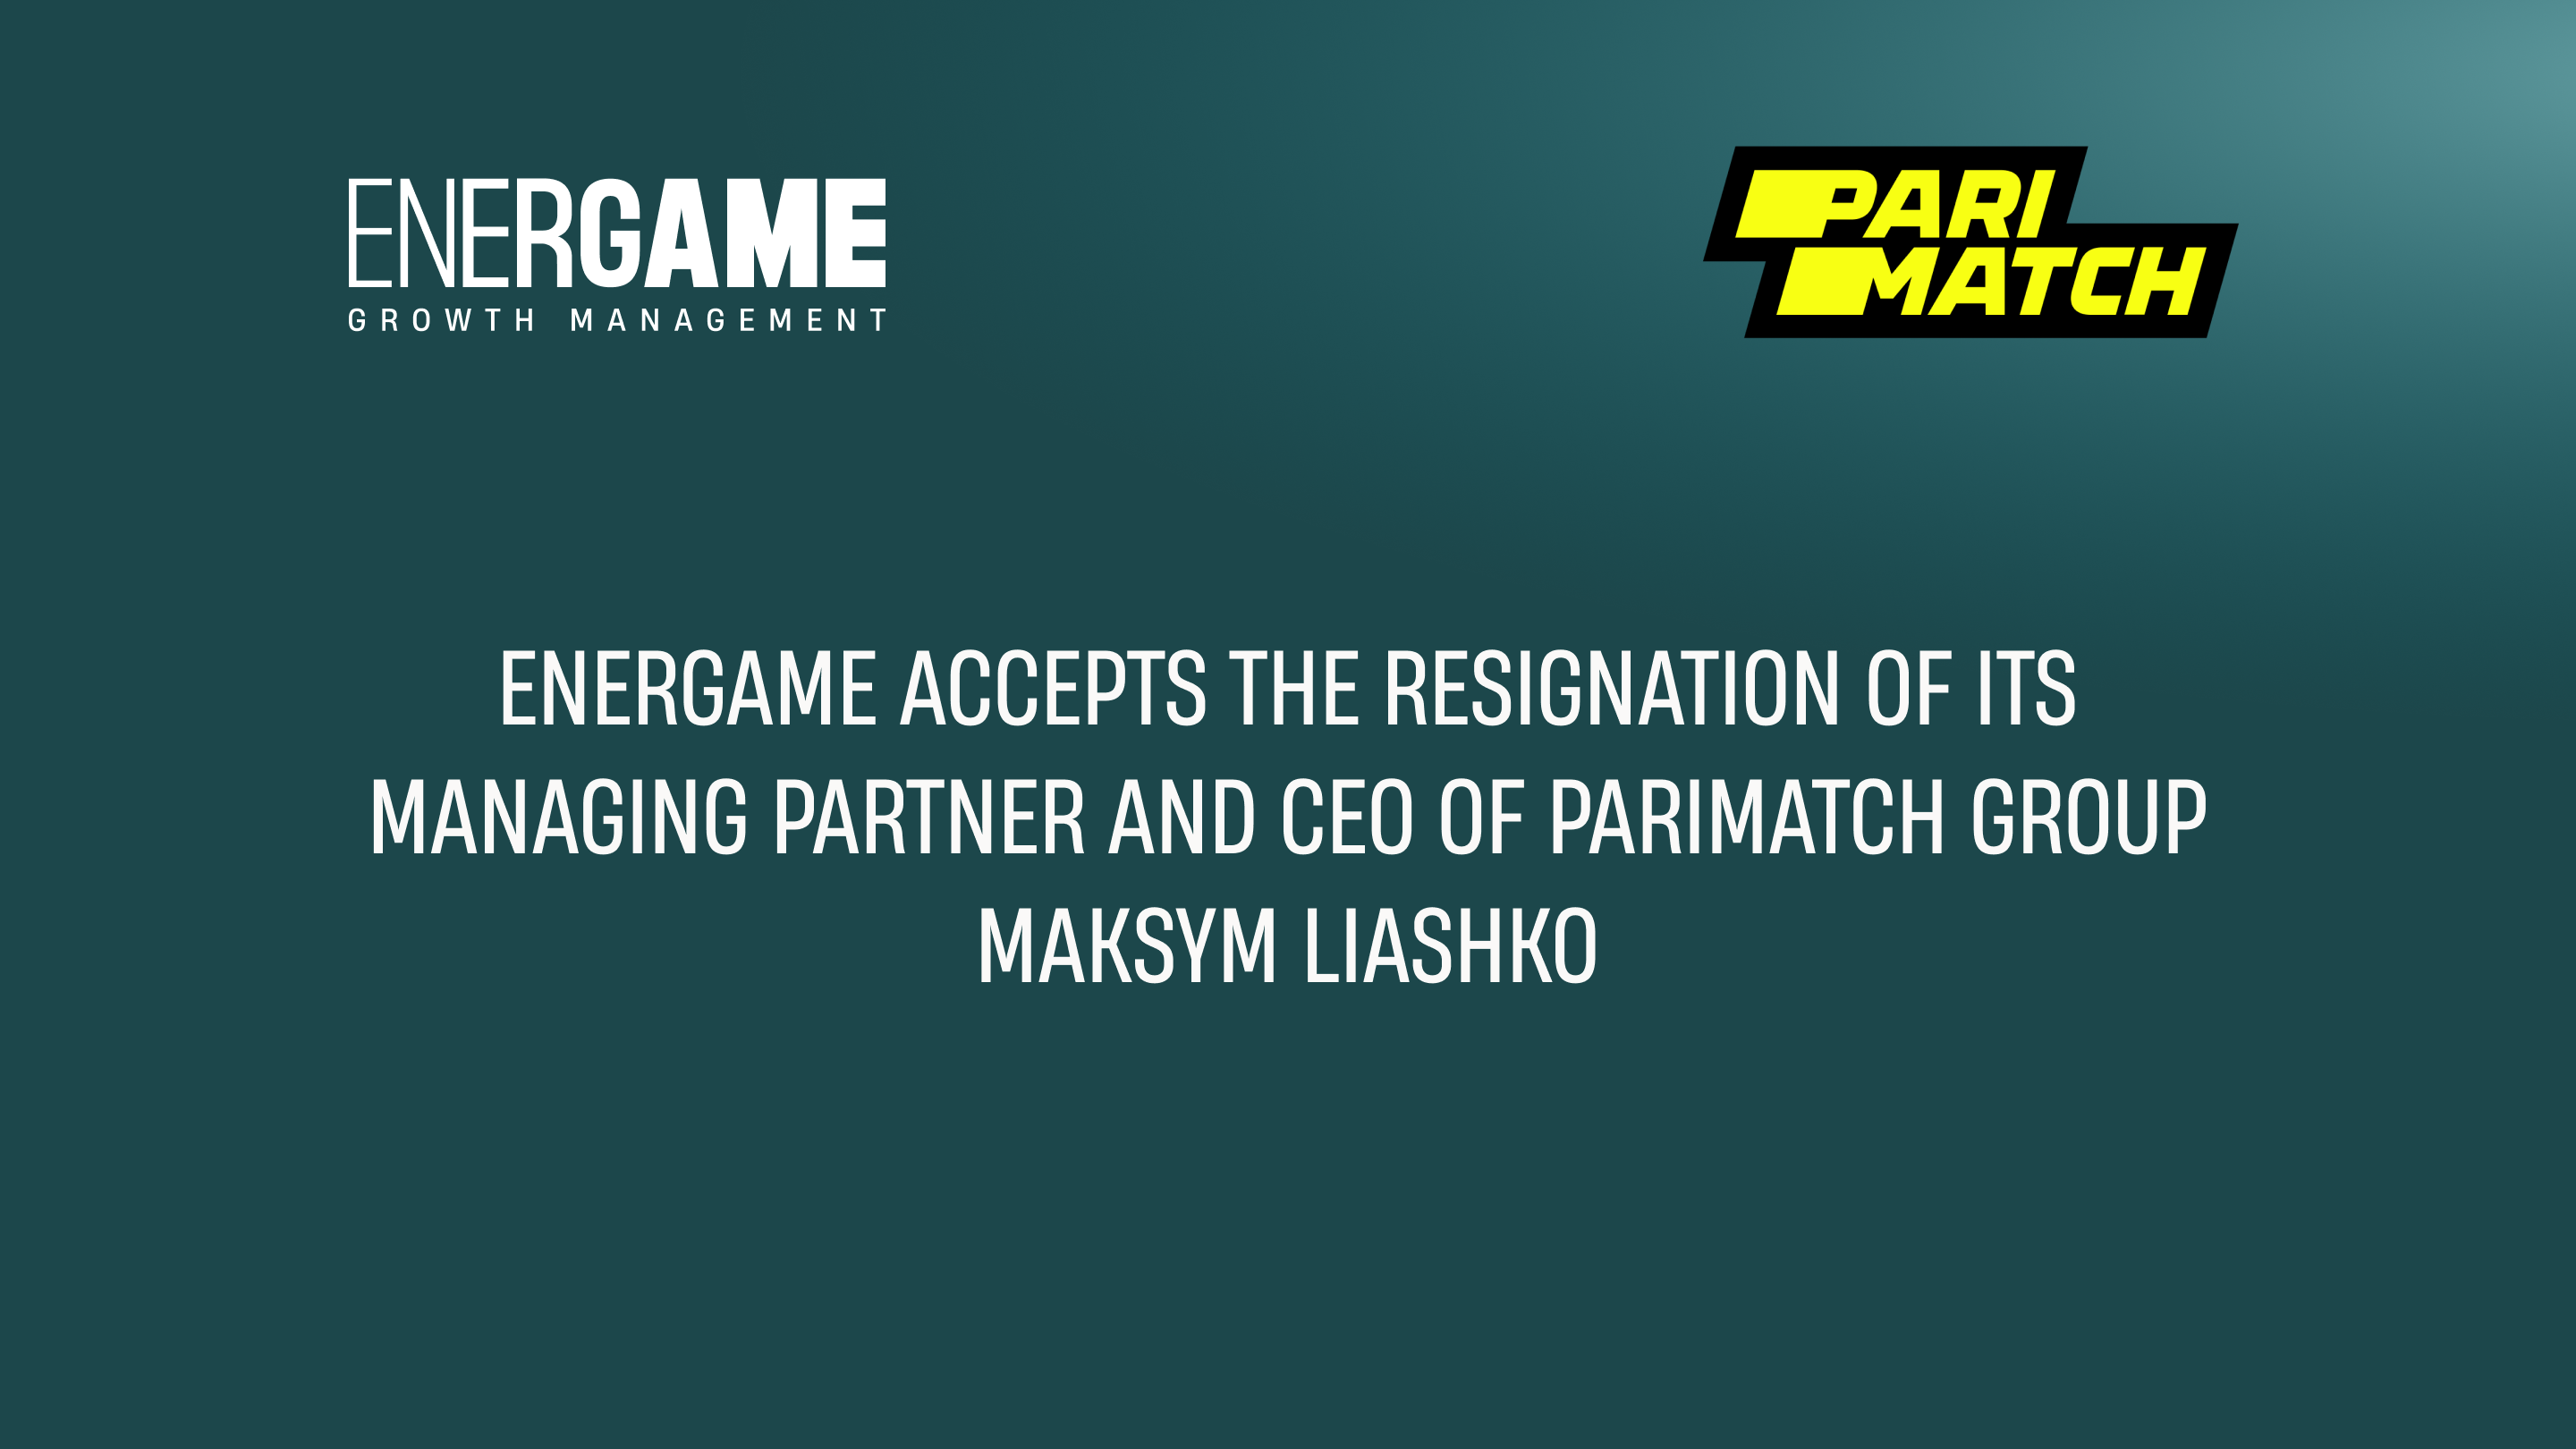 Energame accepts the resignation of its Managing Partner and CEO of Parimatch group Maksym Liashko